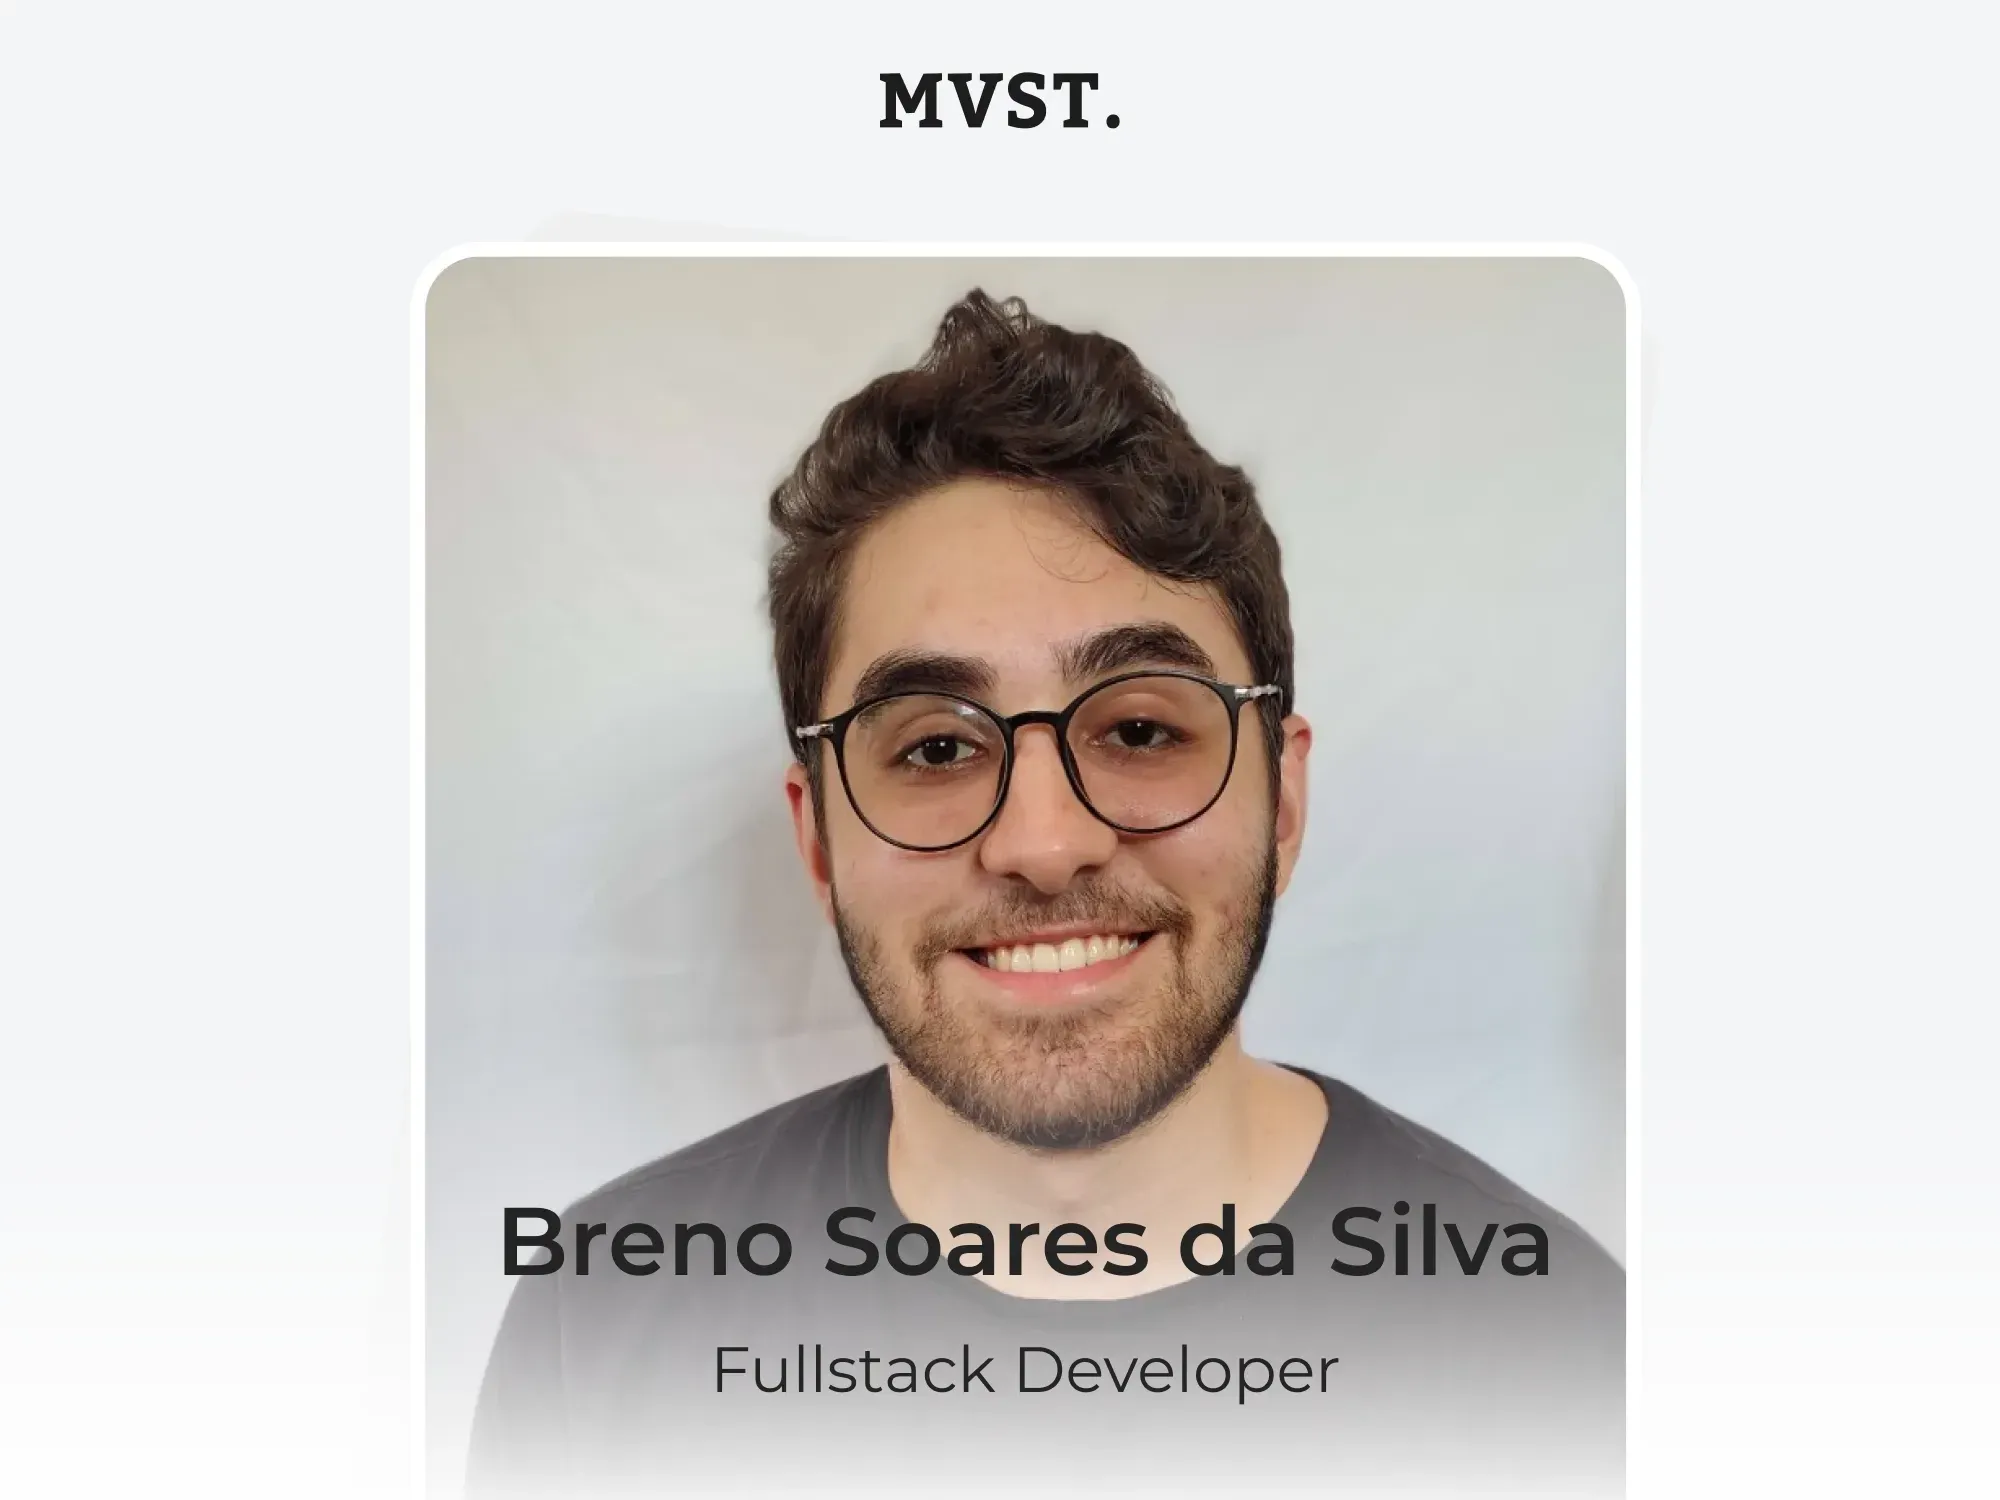 Welcome to MVST, Breno!